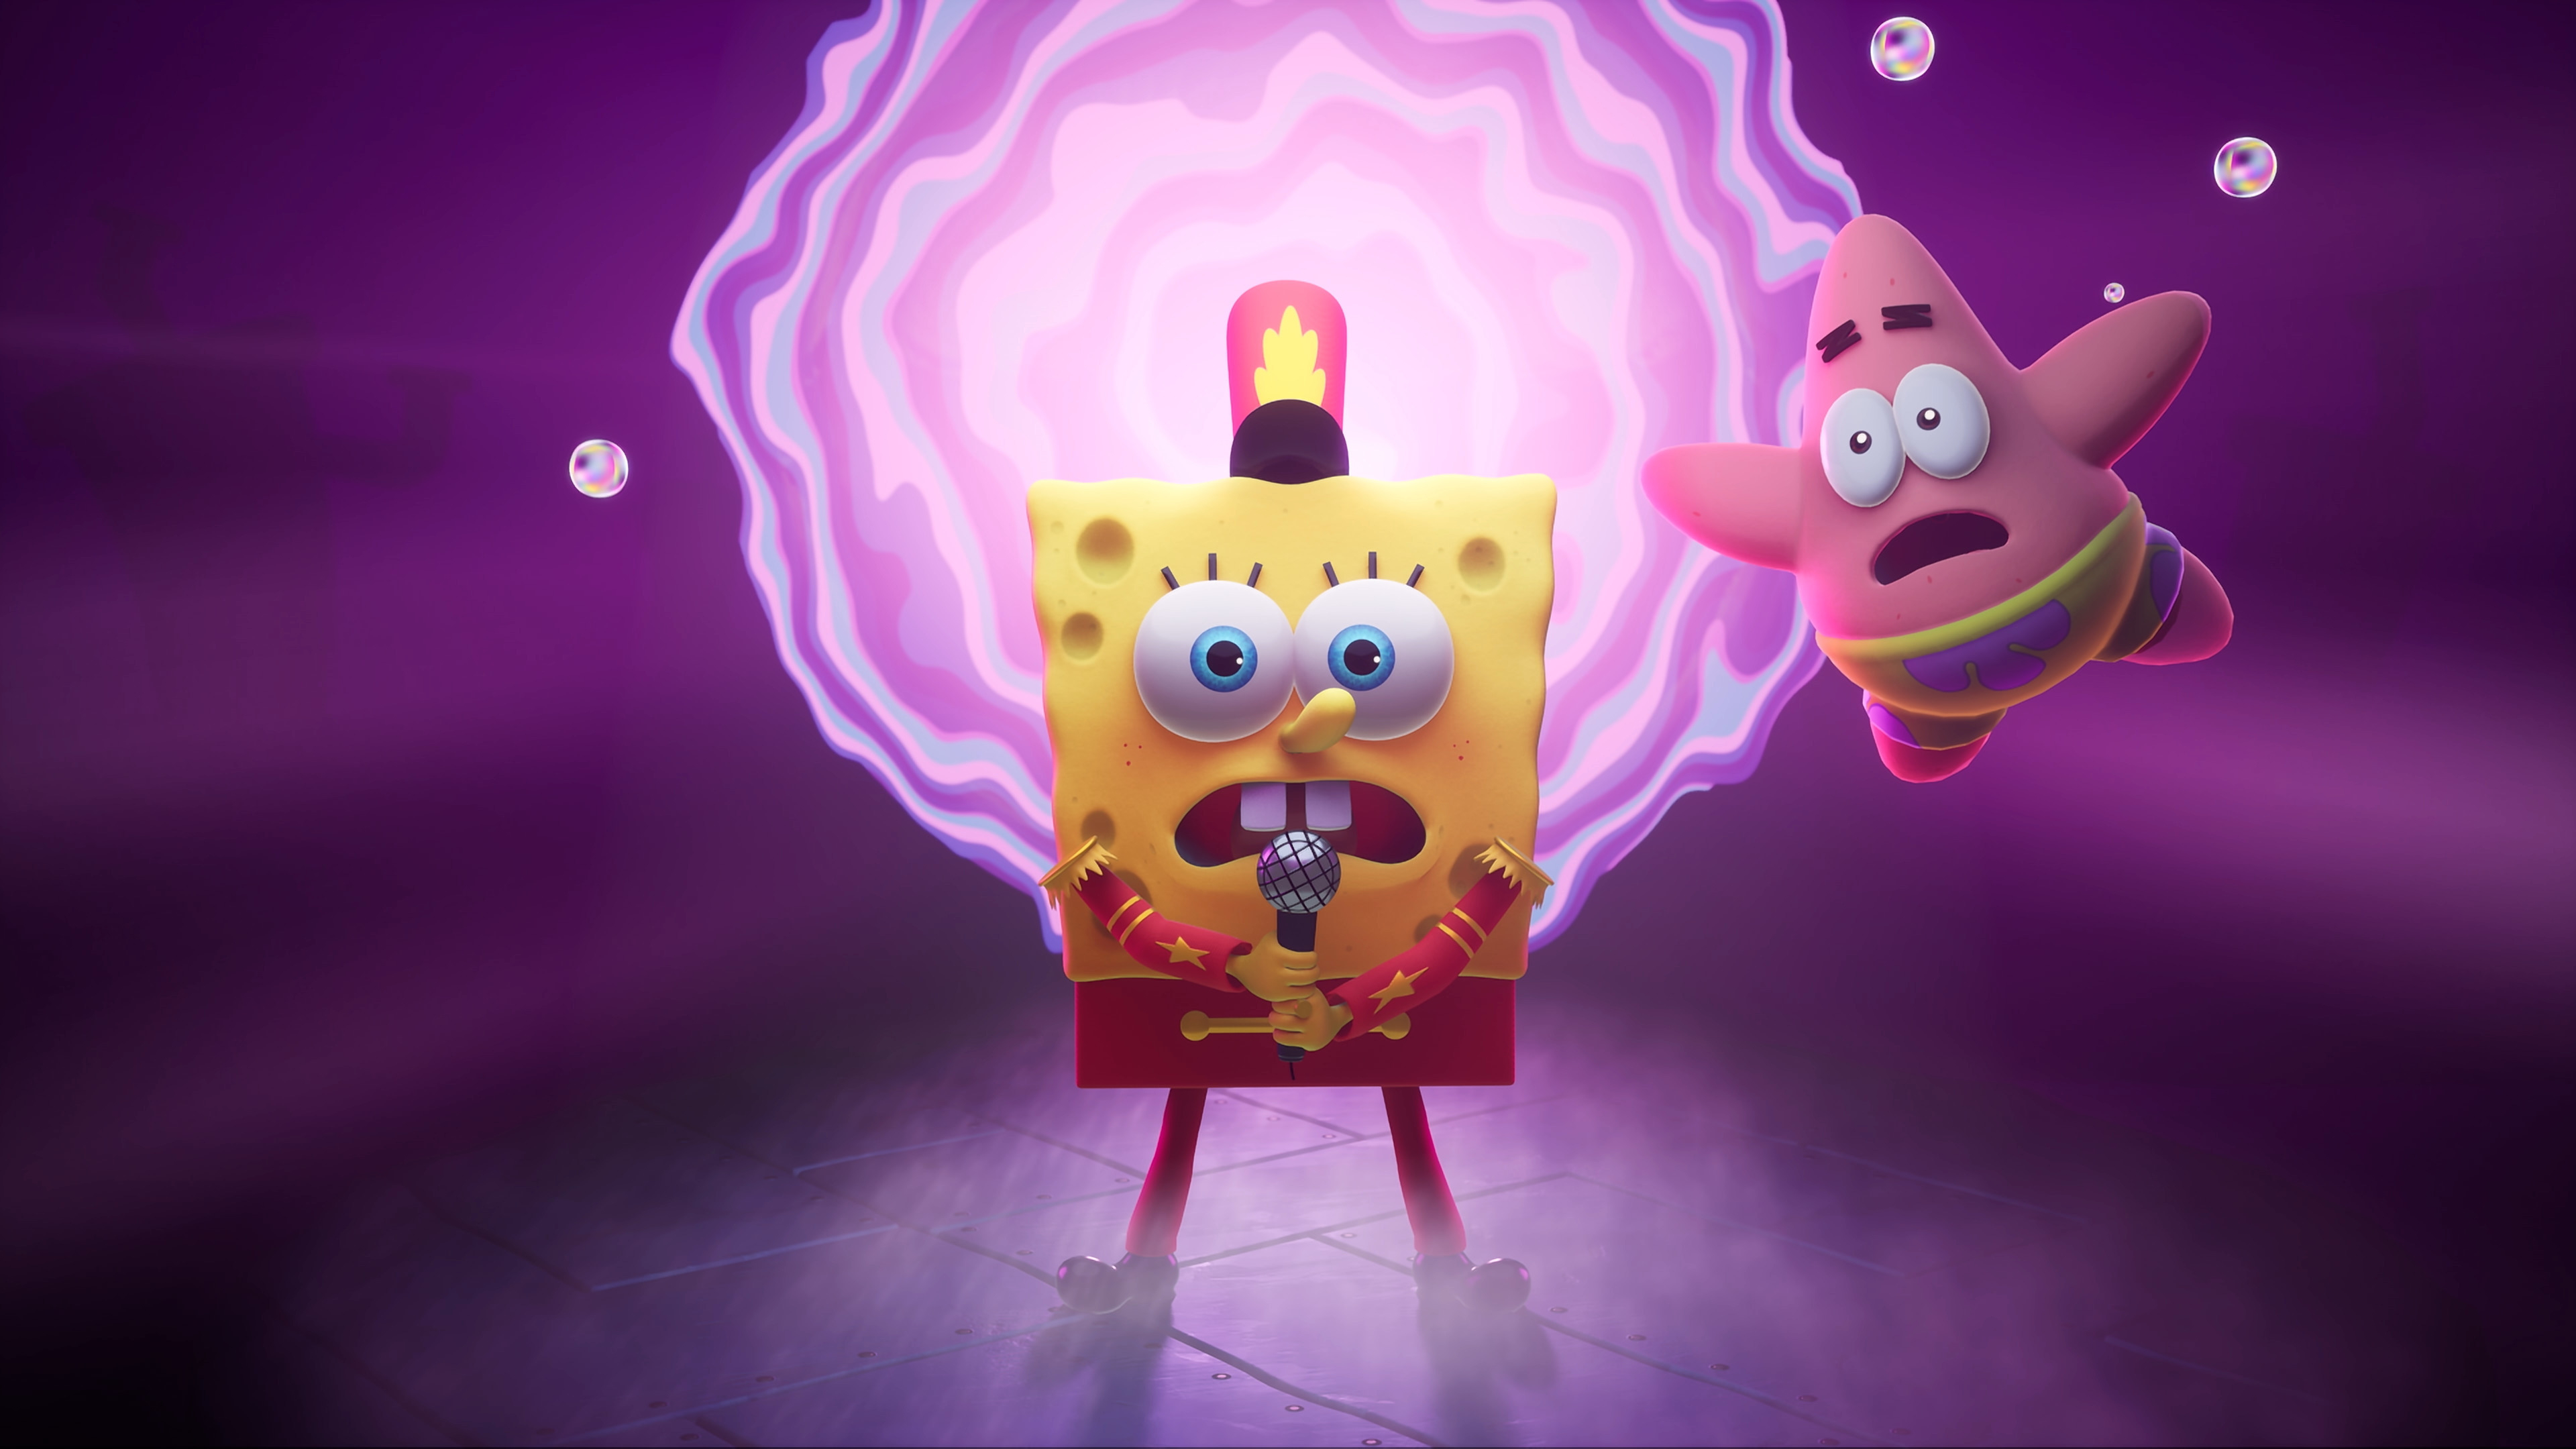 3840x2160 10+ 4K Patrick Star Wallpapers | Background Images